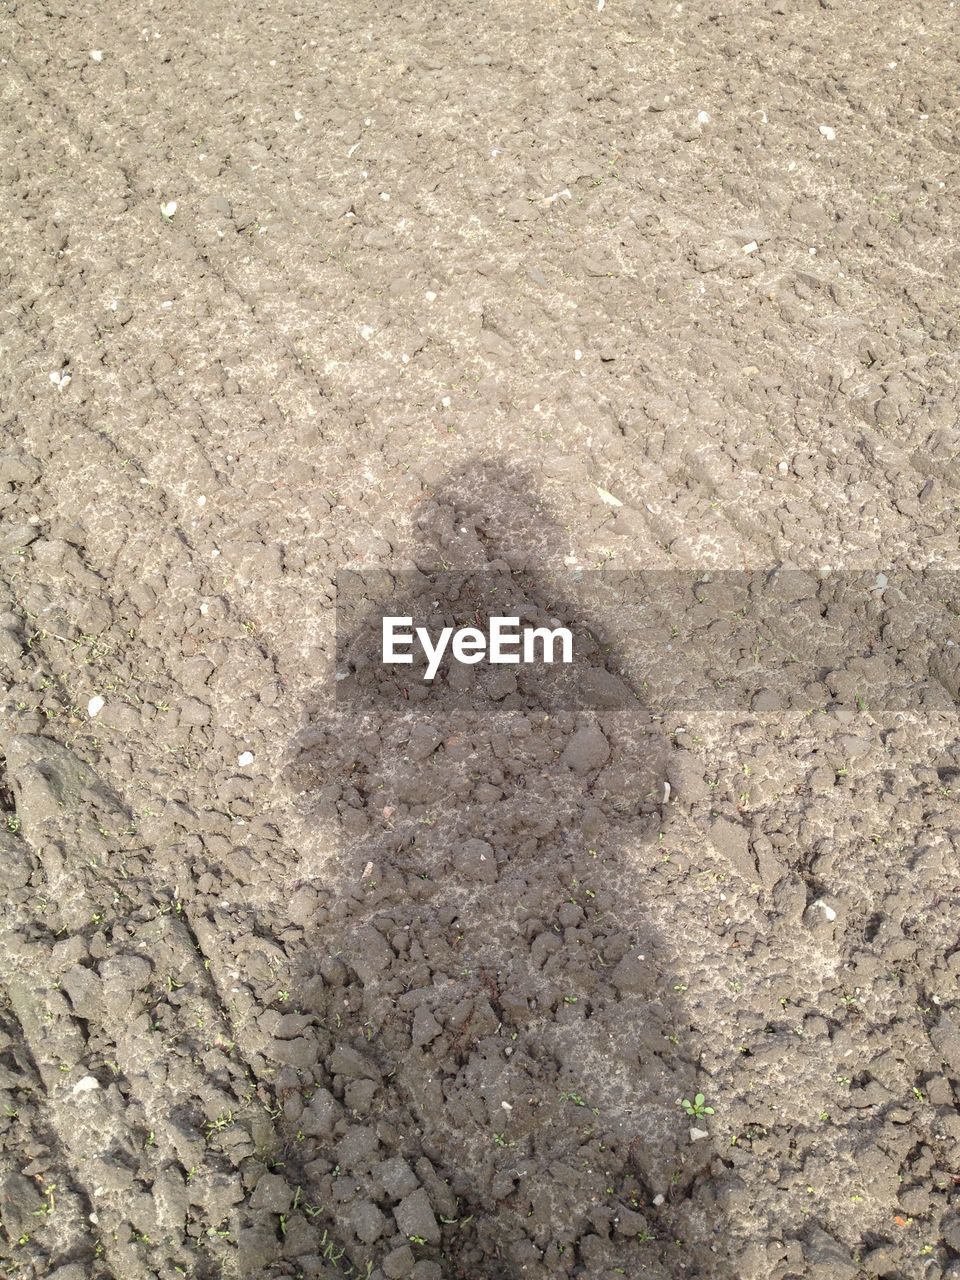 Shadow of person on plowed field